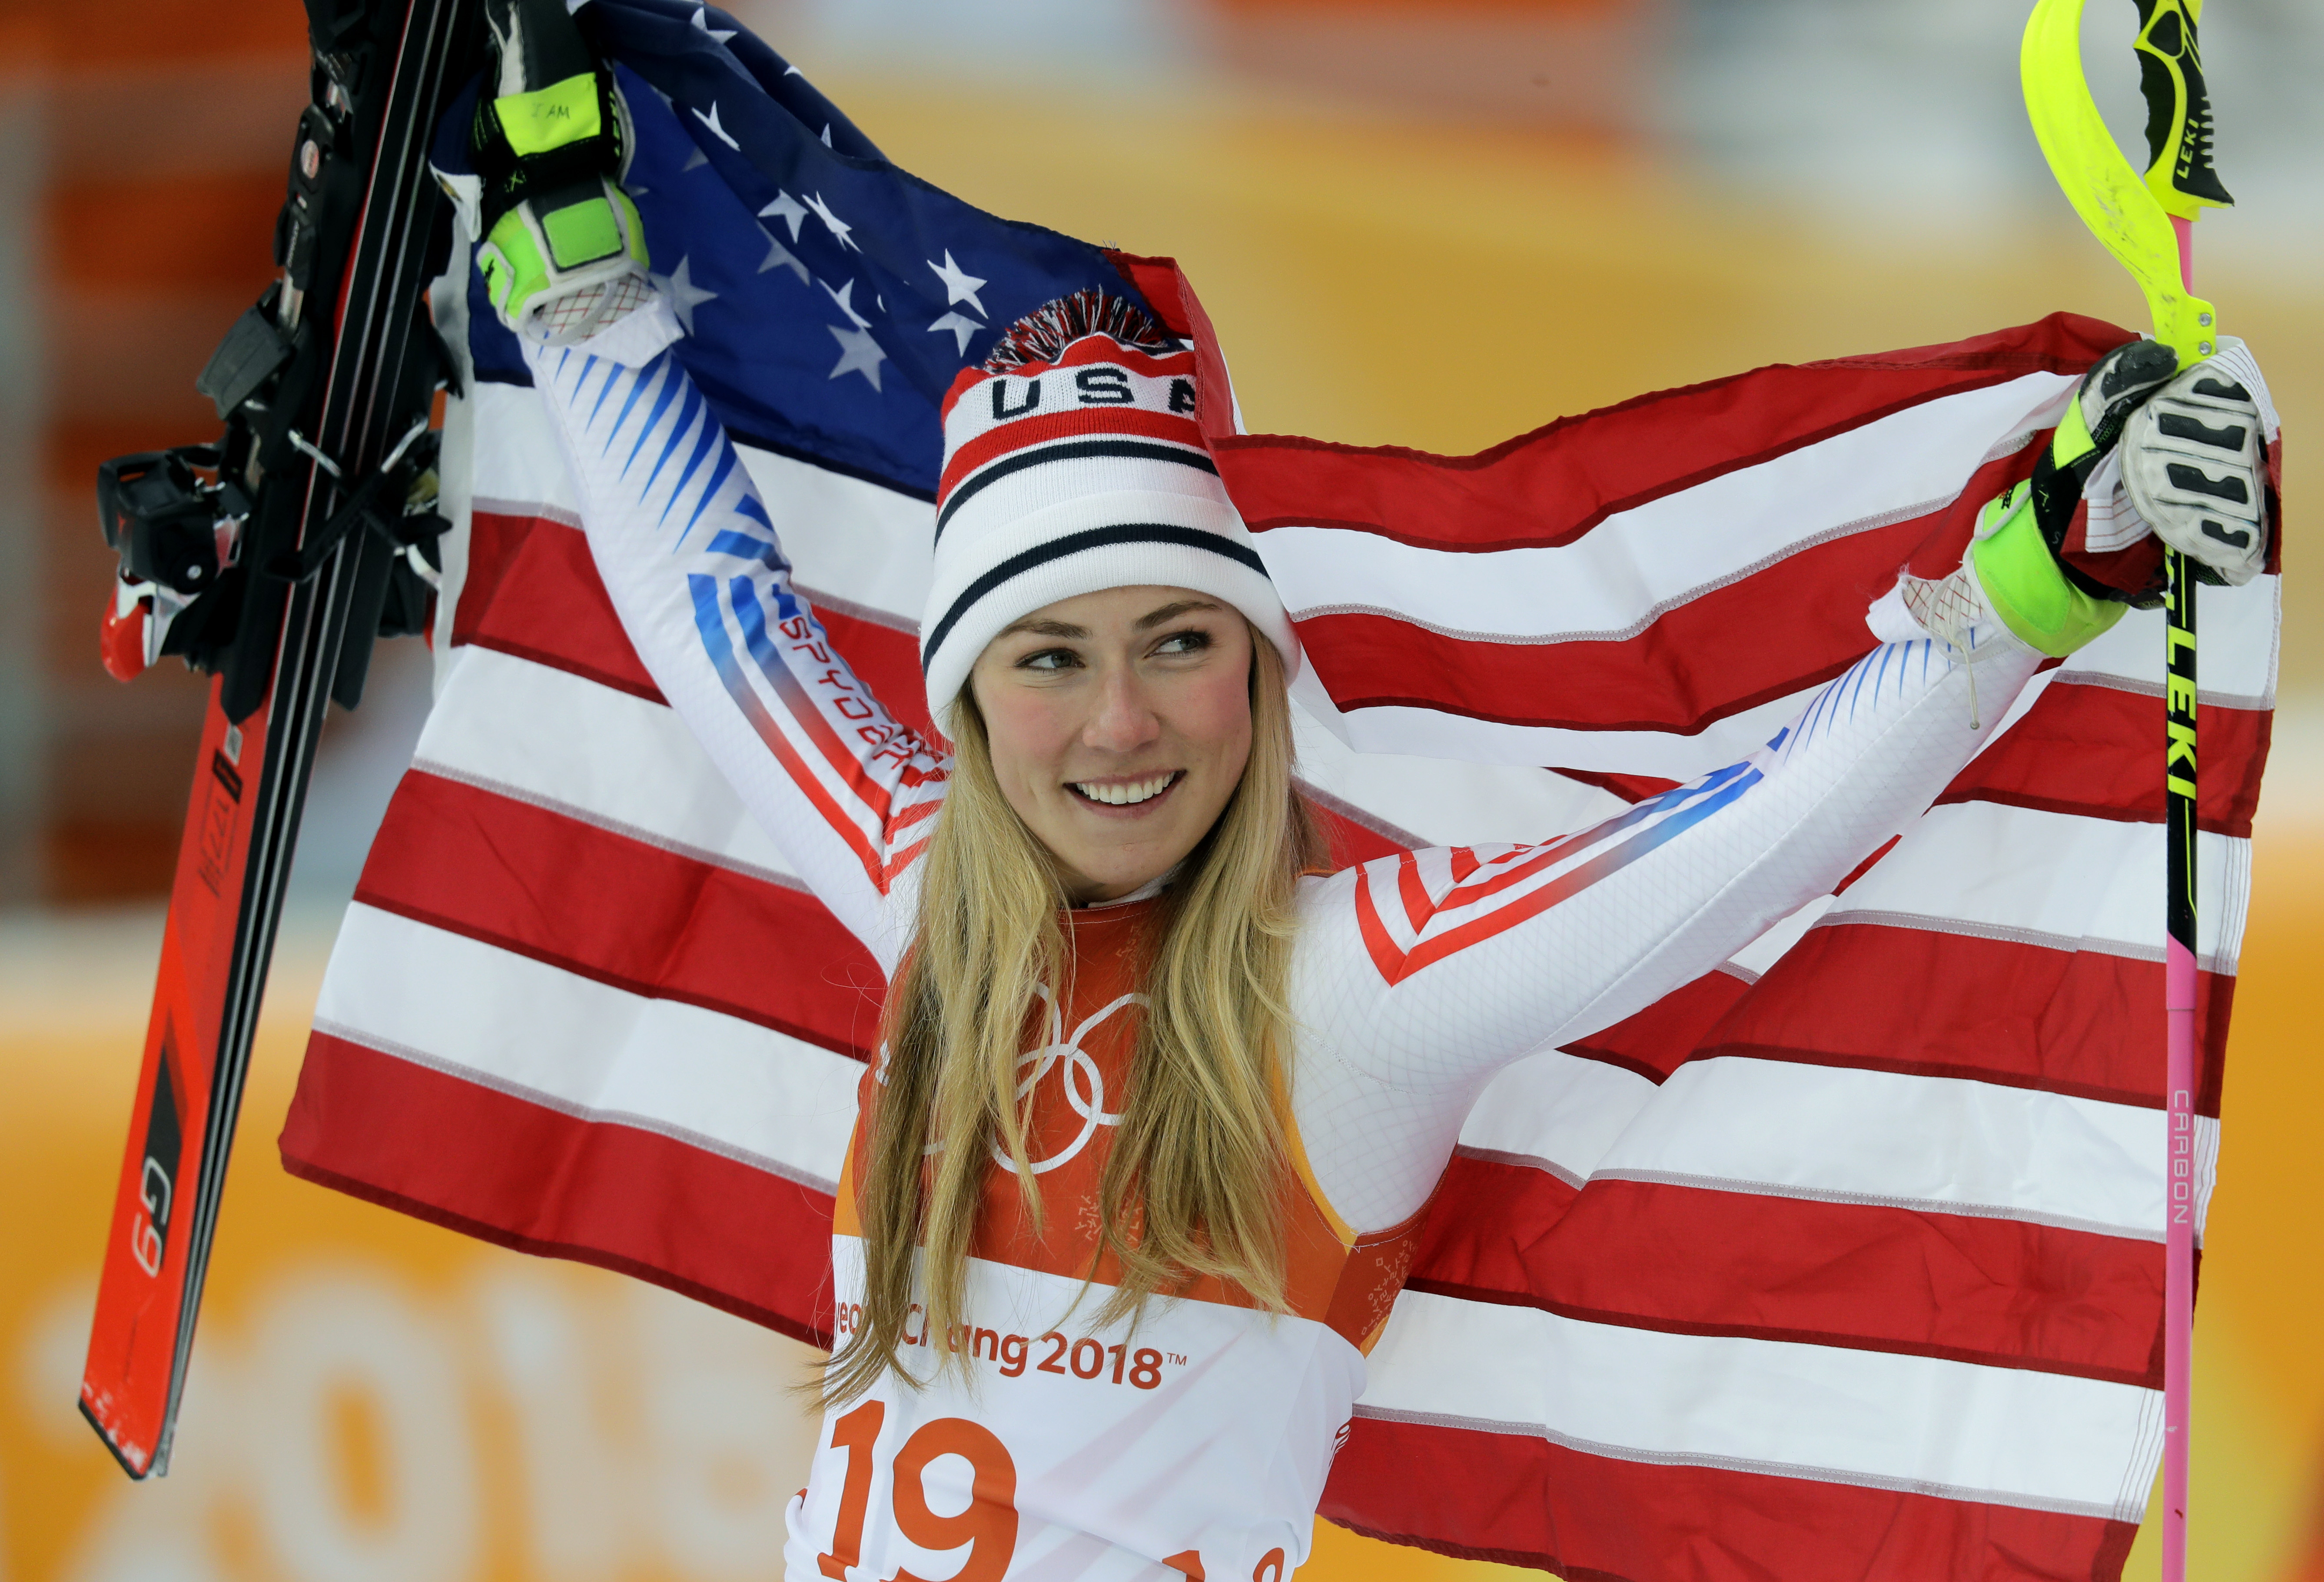 Womens skiing giant slalom final Live stream, start time, TV, how to watch Mikaela Shiffin at 2022 Winter Olympics